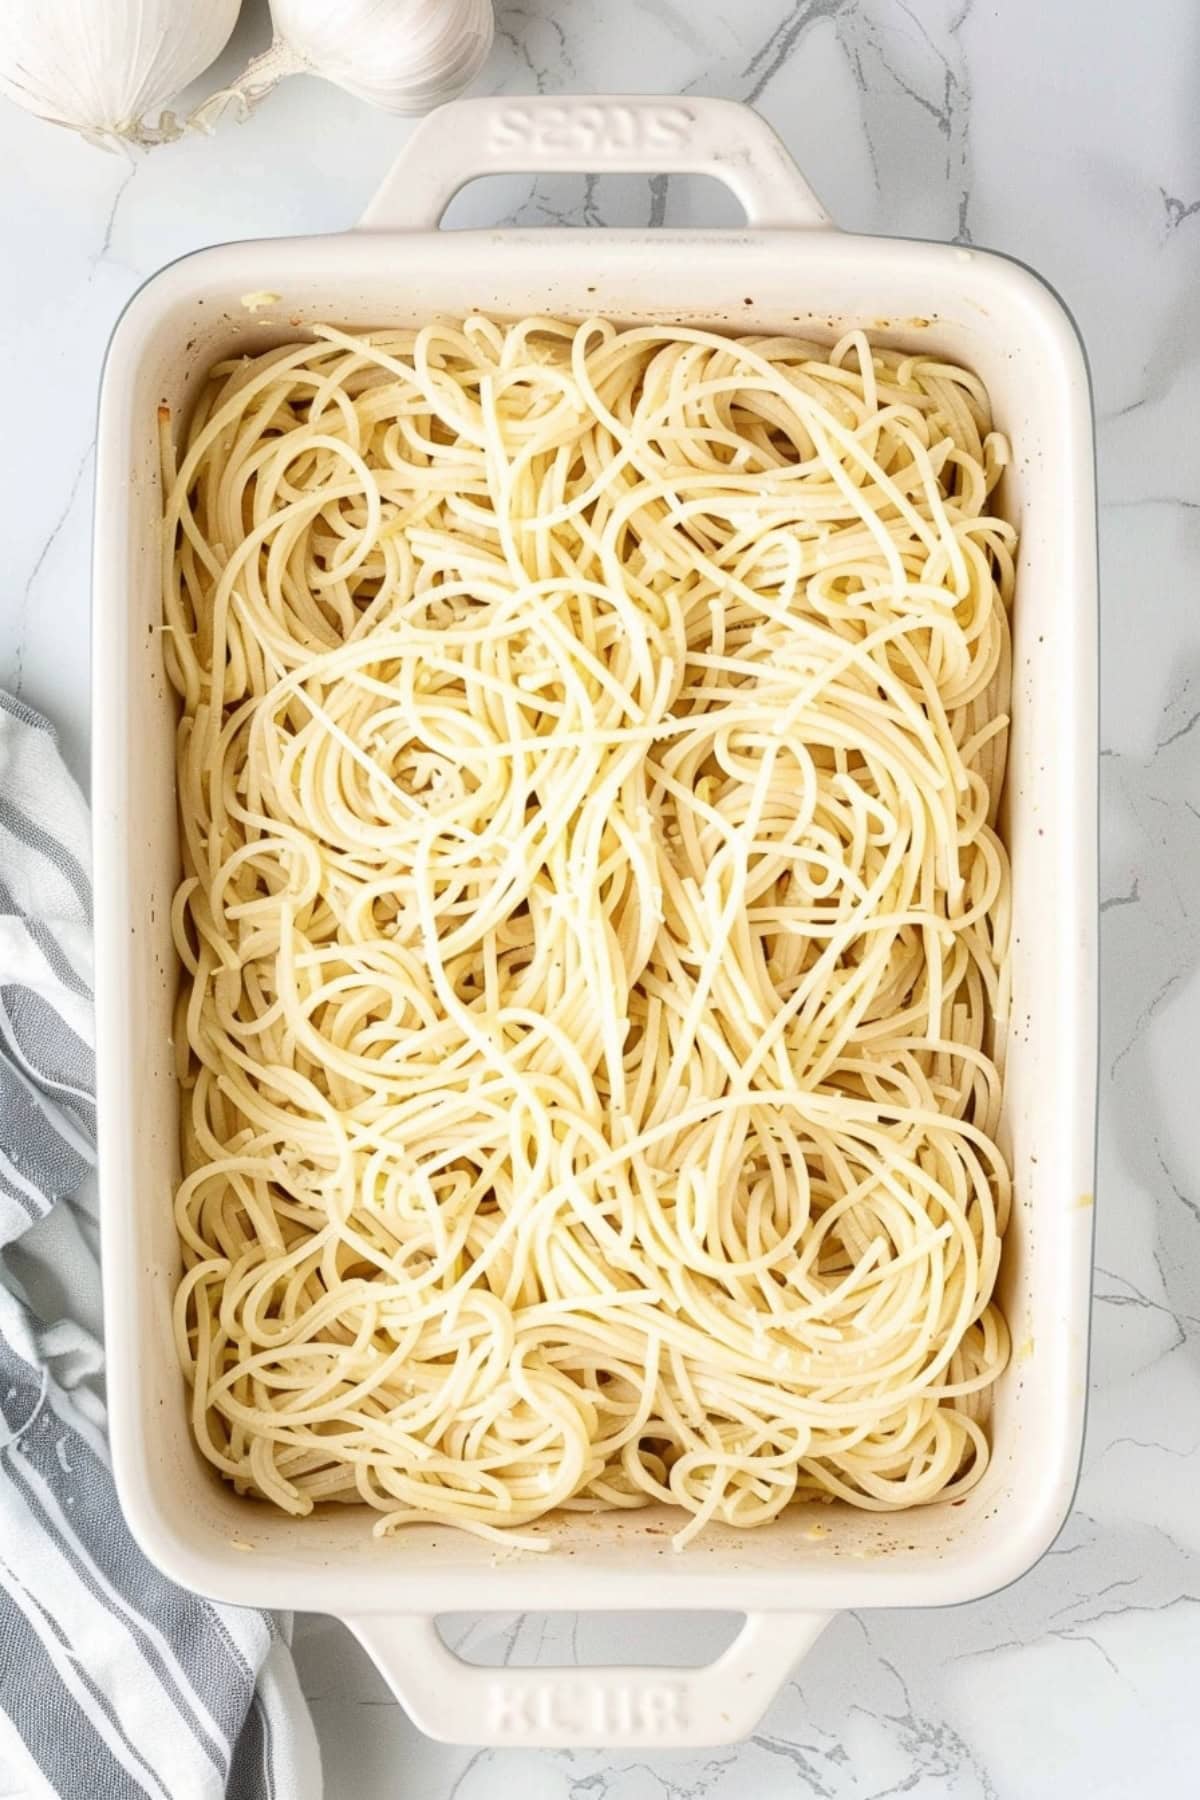 Overhead view of cooked pasta in a white baking dish.